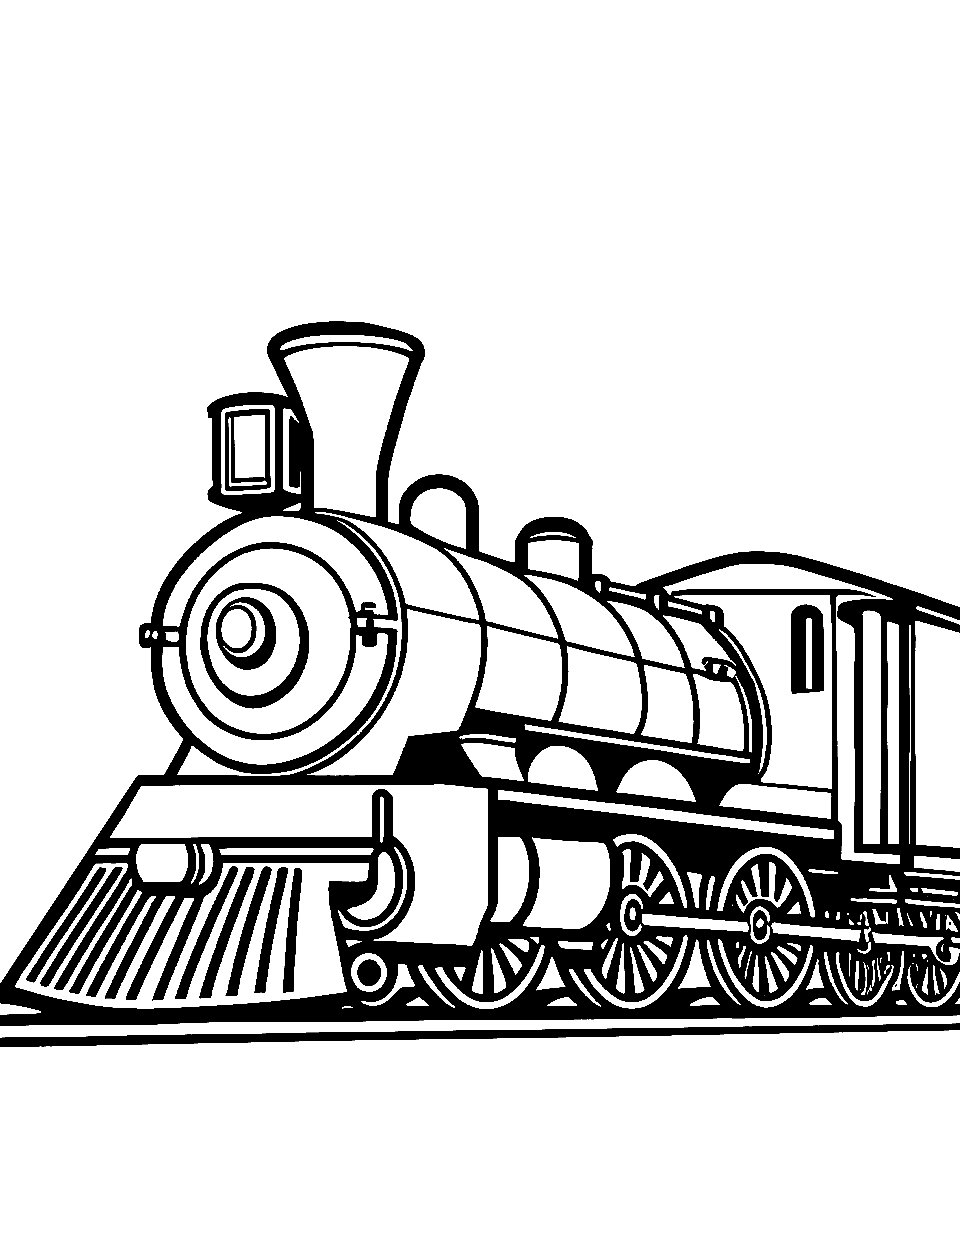 Royal Train Procession Coloring Page - A luxurious train fit for royalty.